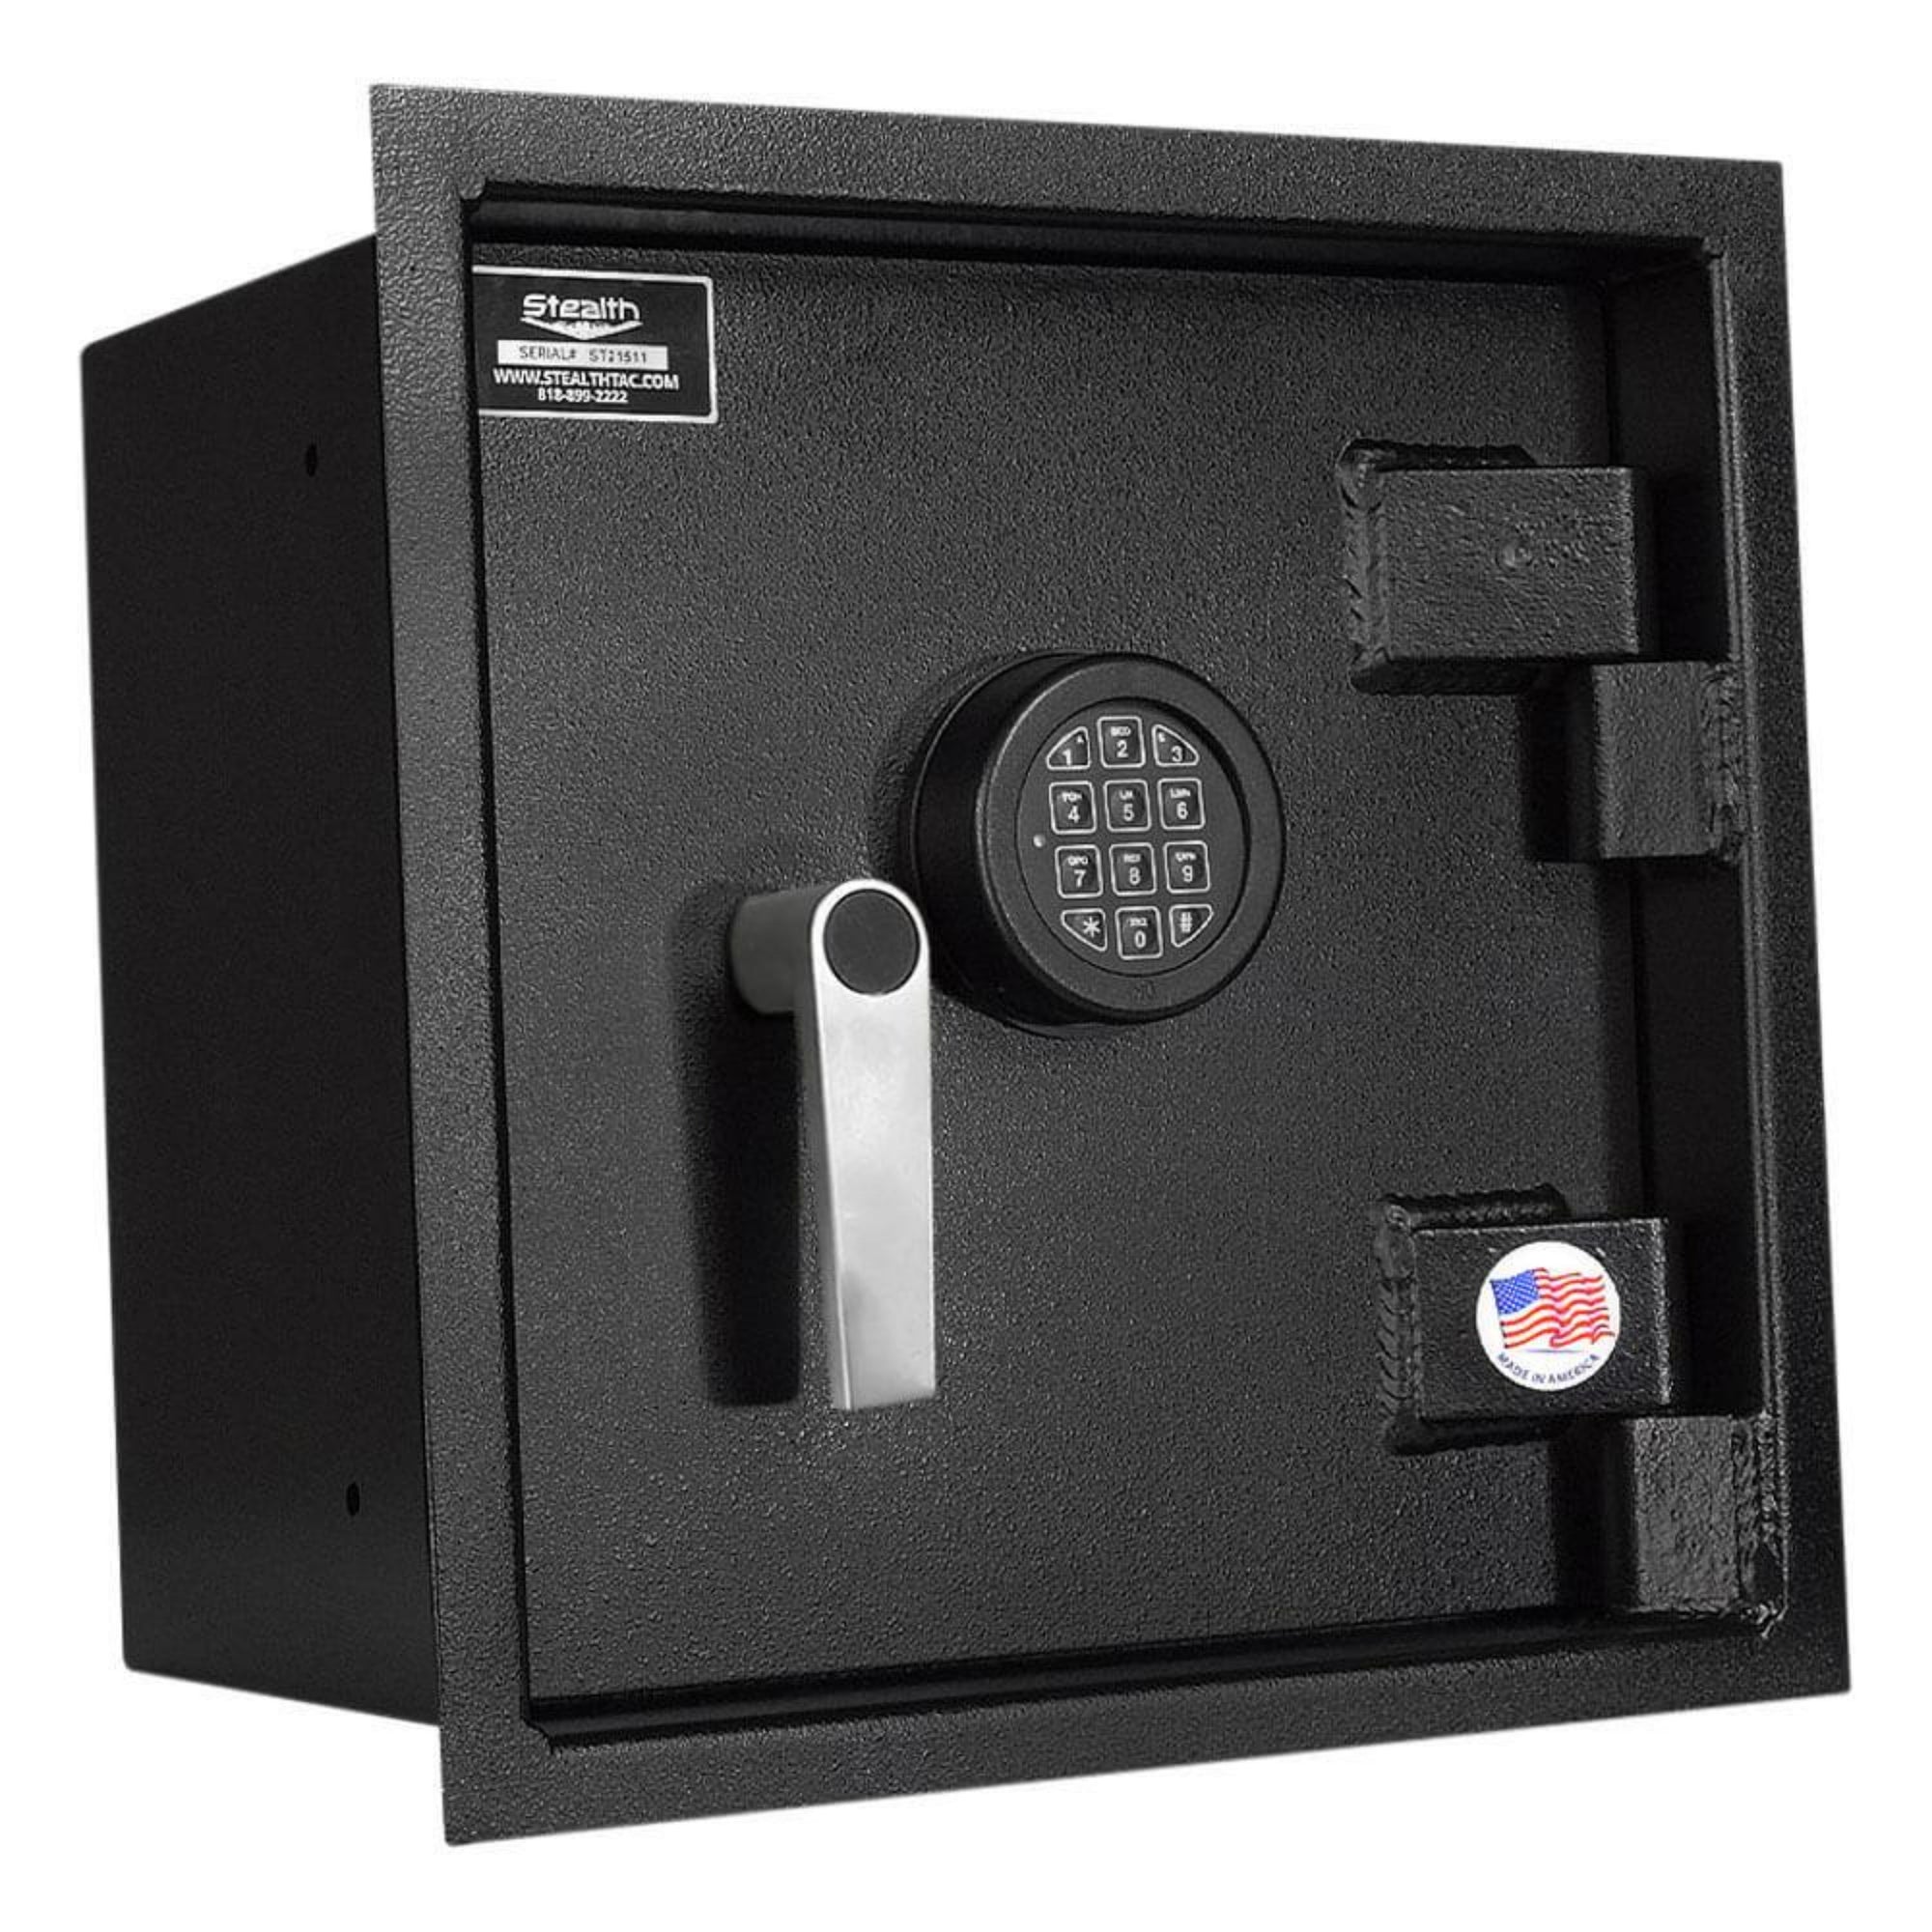 Stealth WSHD1414 Heavy Duty Wall Safe Extra Deep, part of the Dean Safe wall safe collection